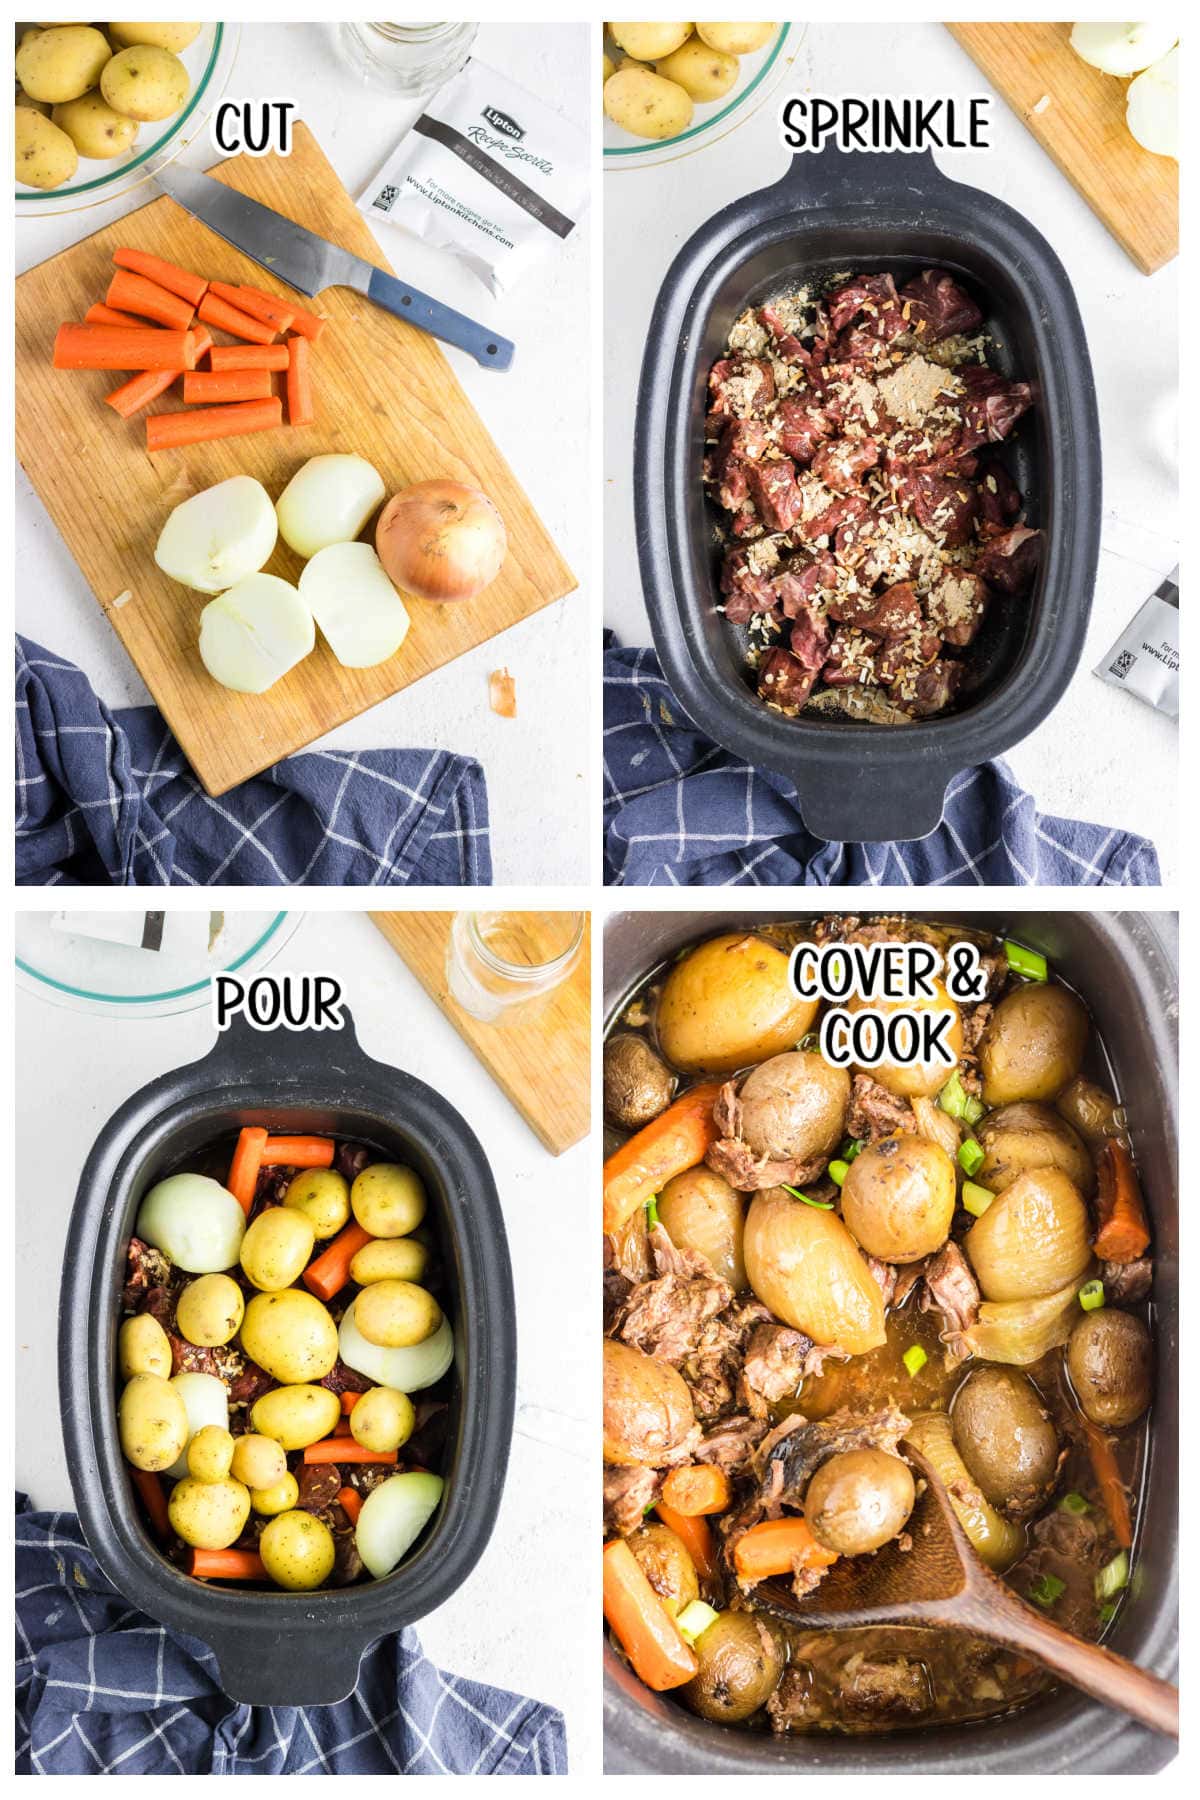 Four overhead images of the main recipe steps with text overlay: cut, sprinkle, pour, and cook and cover.